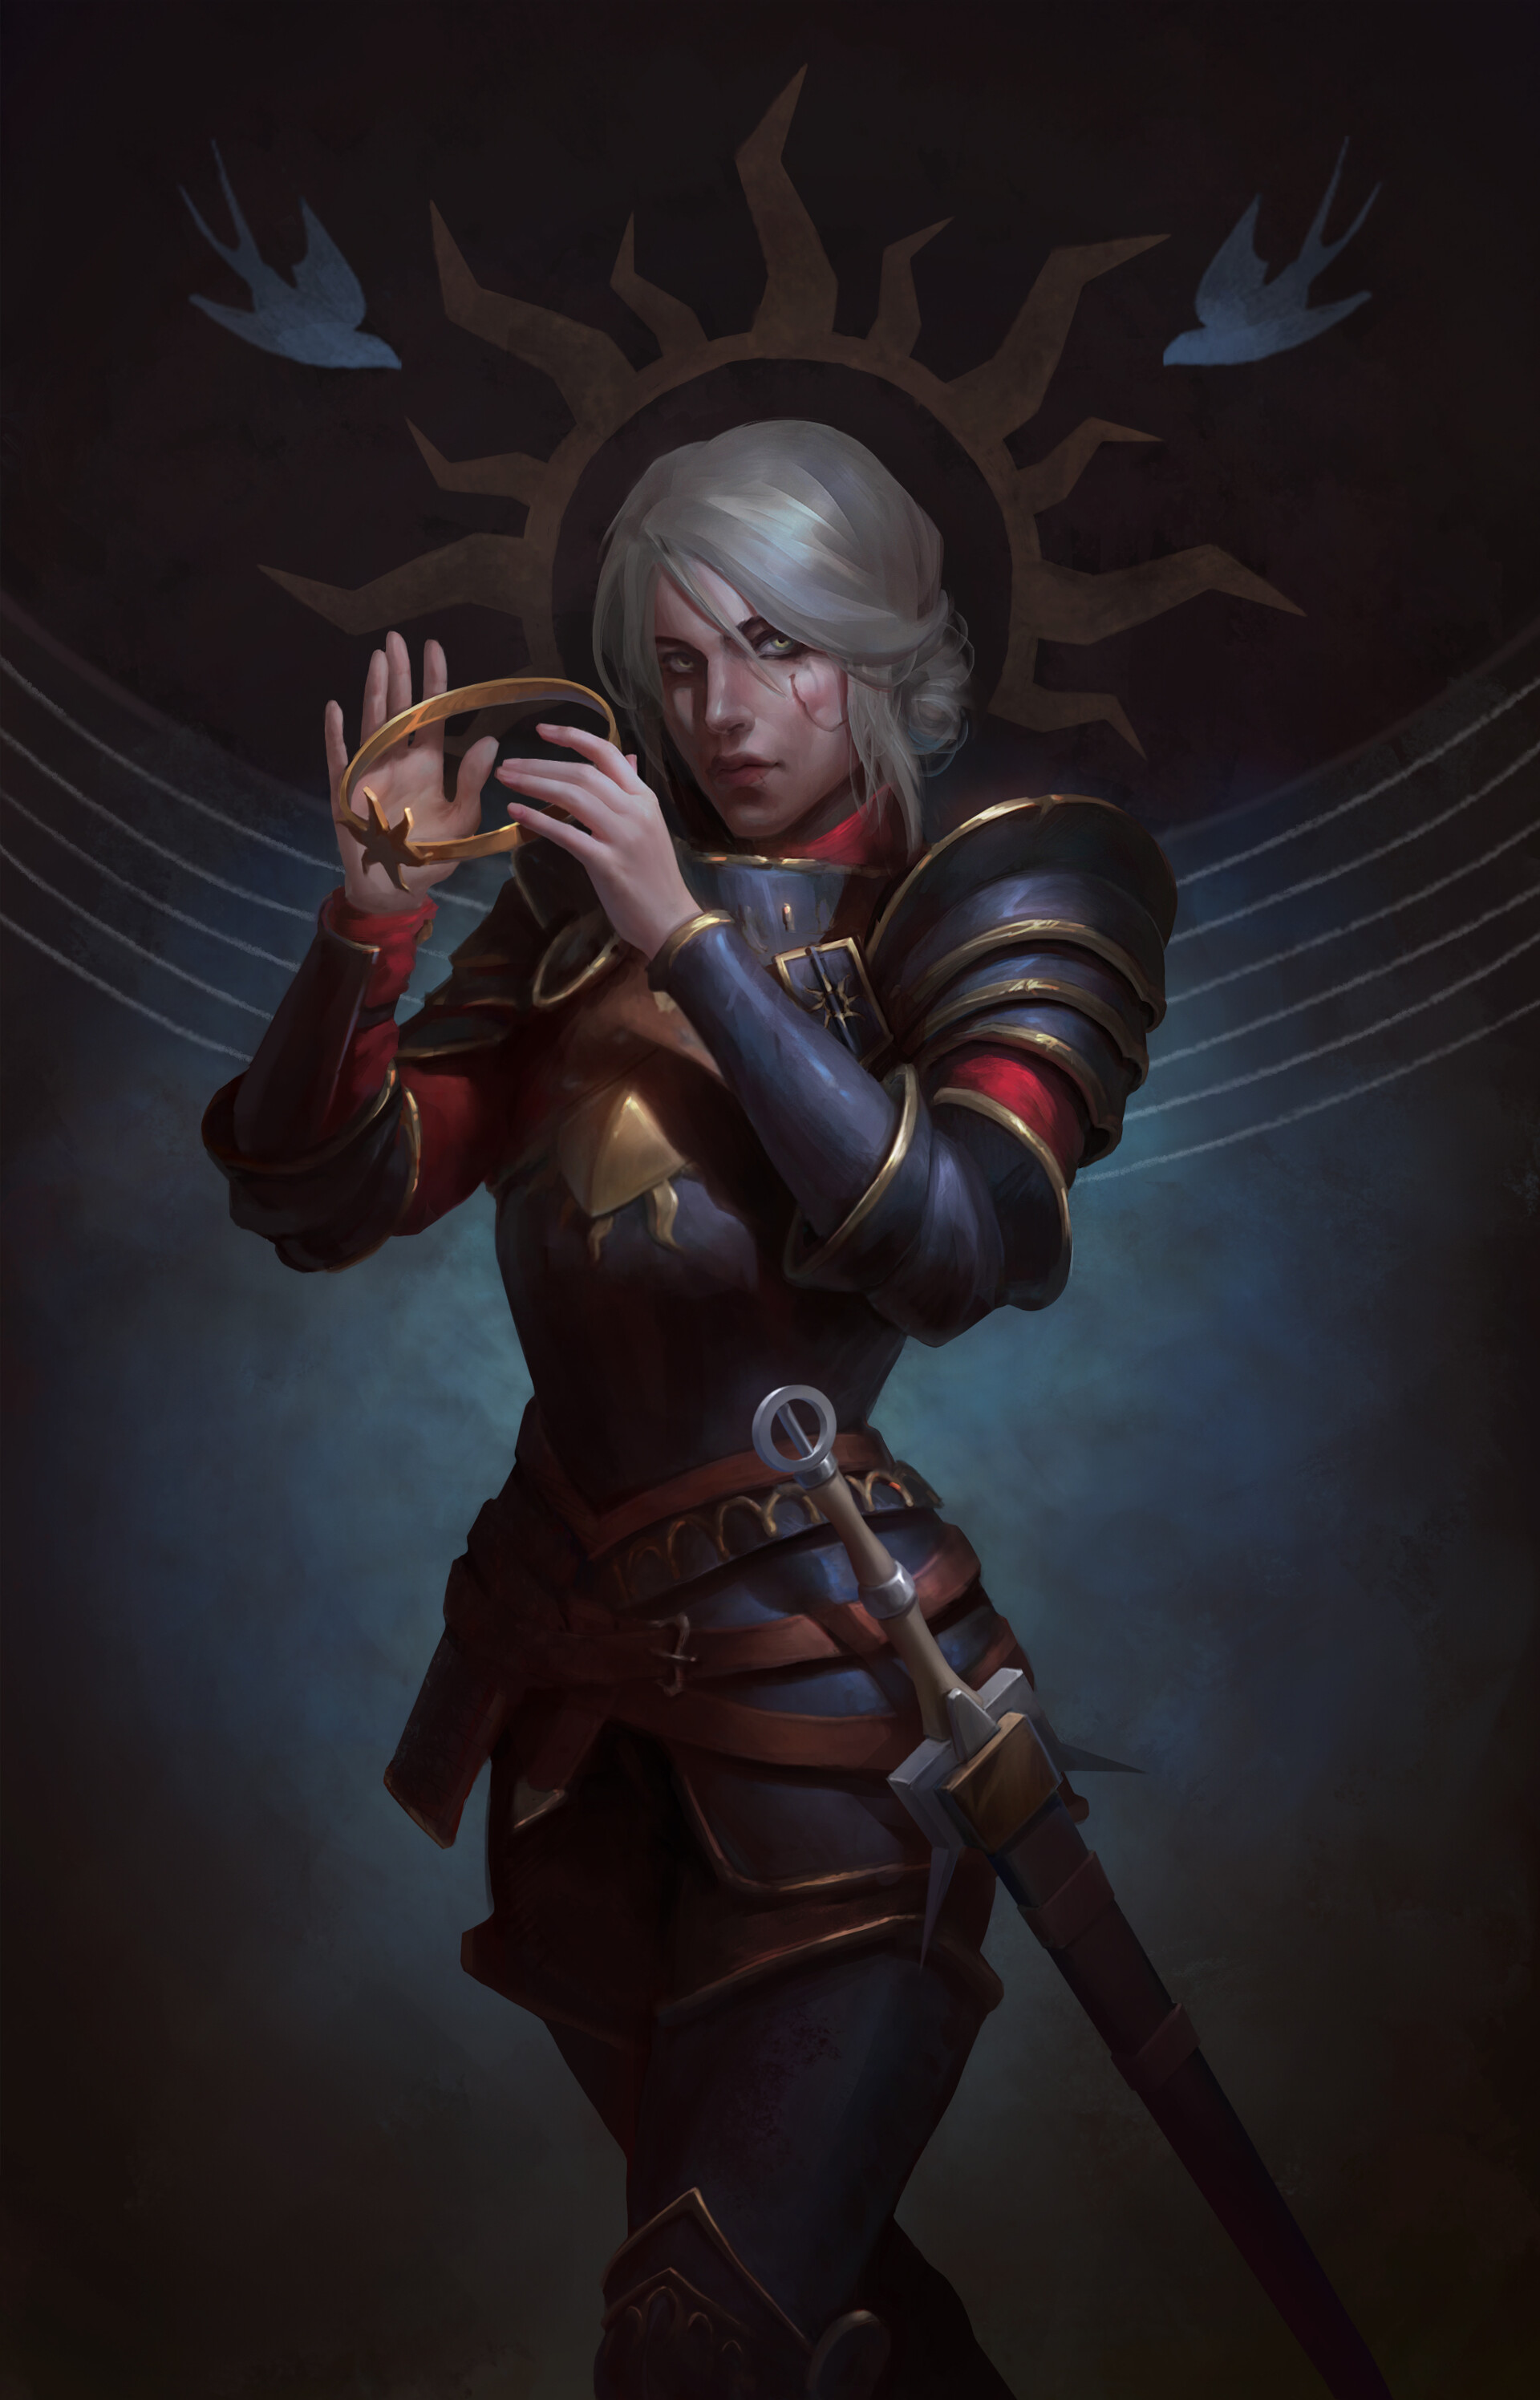 Witcher Ciri From Gwent Fanart By Mariya Negoduet Women With Protection